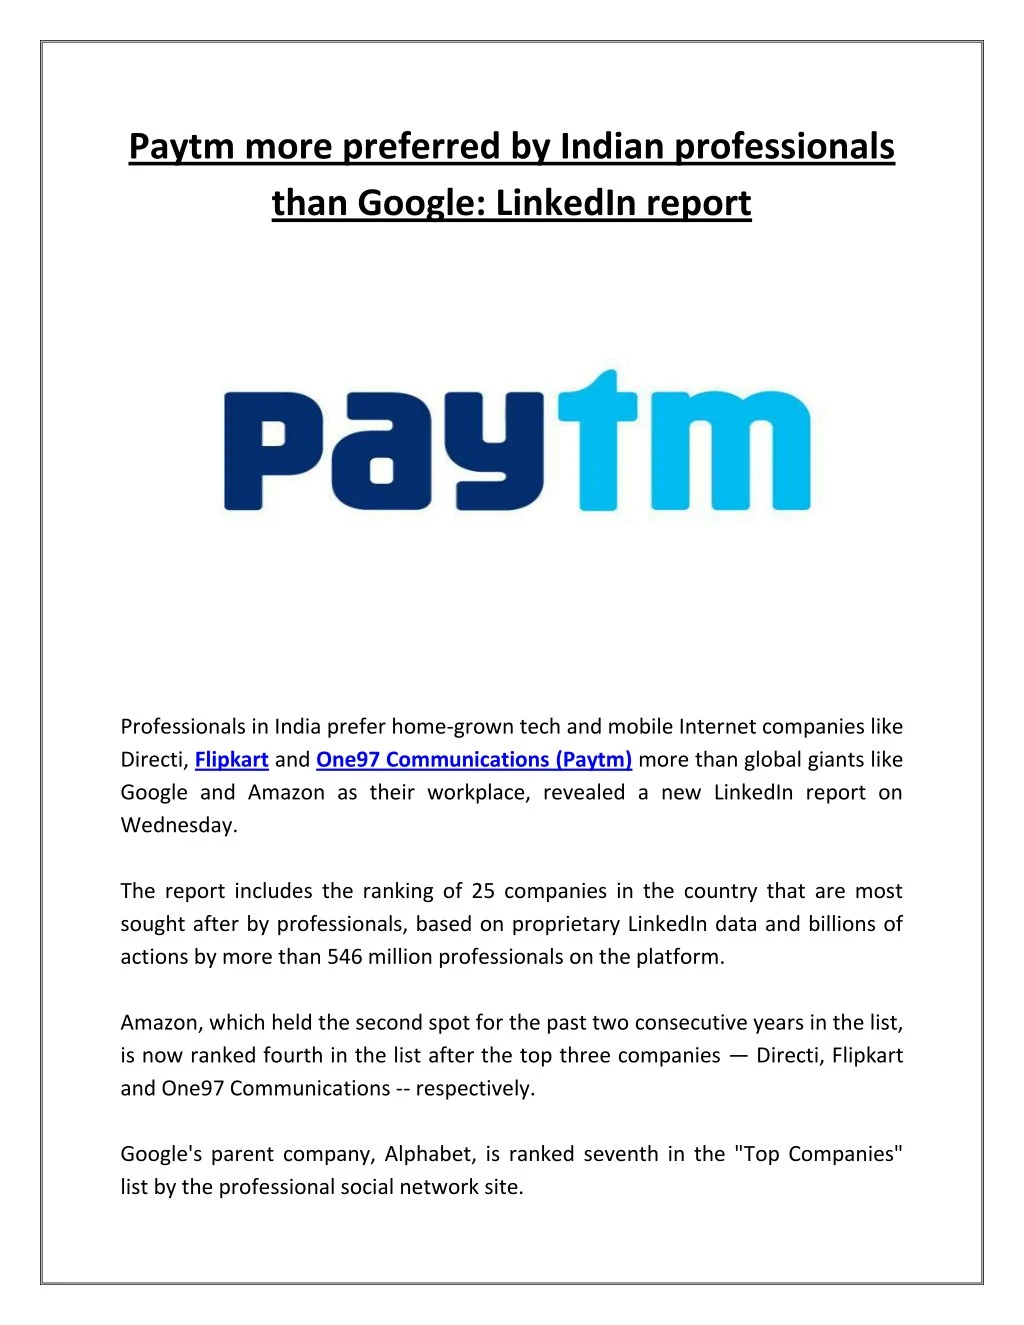 paytm more preferred by indian professionals than